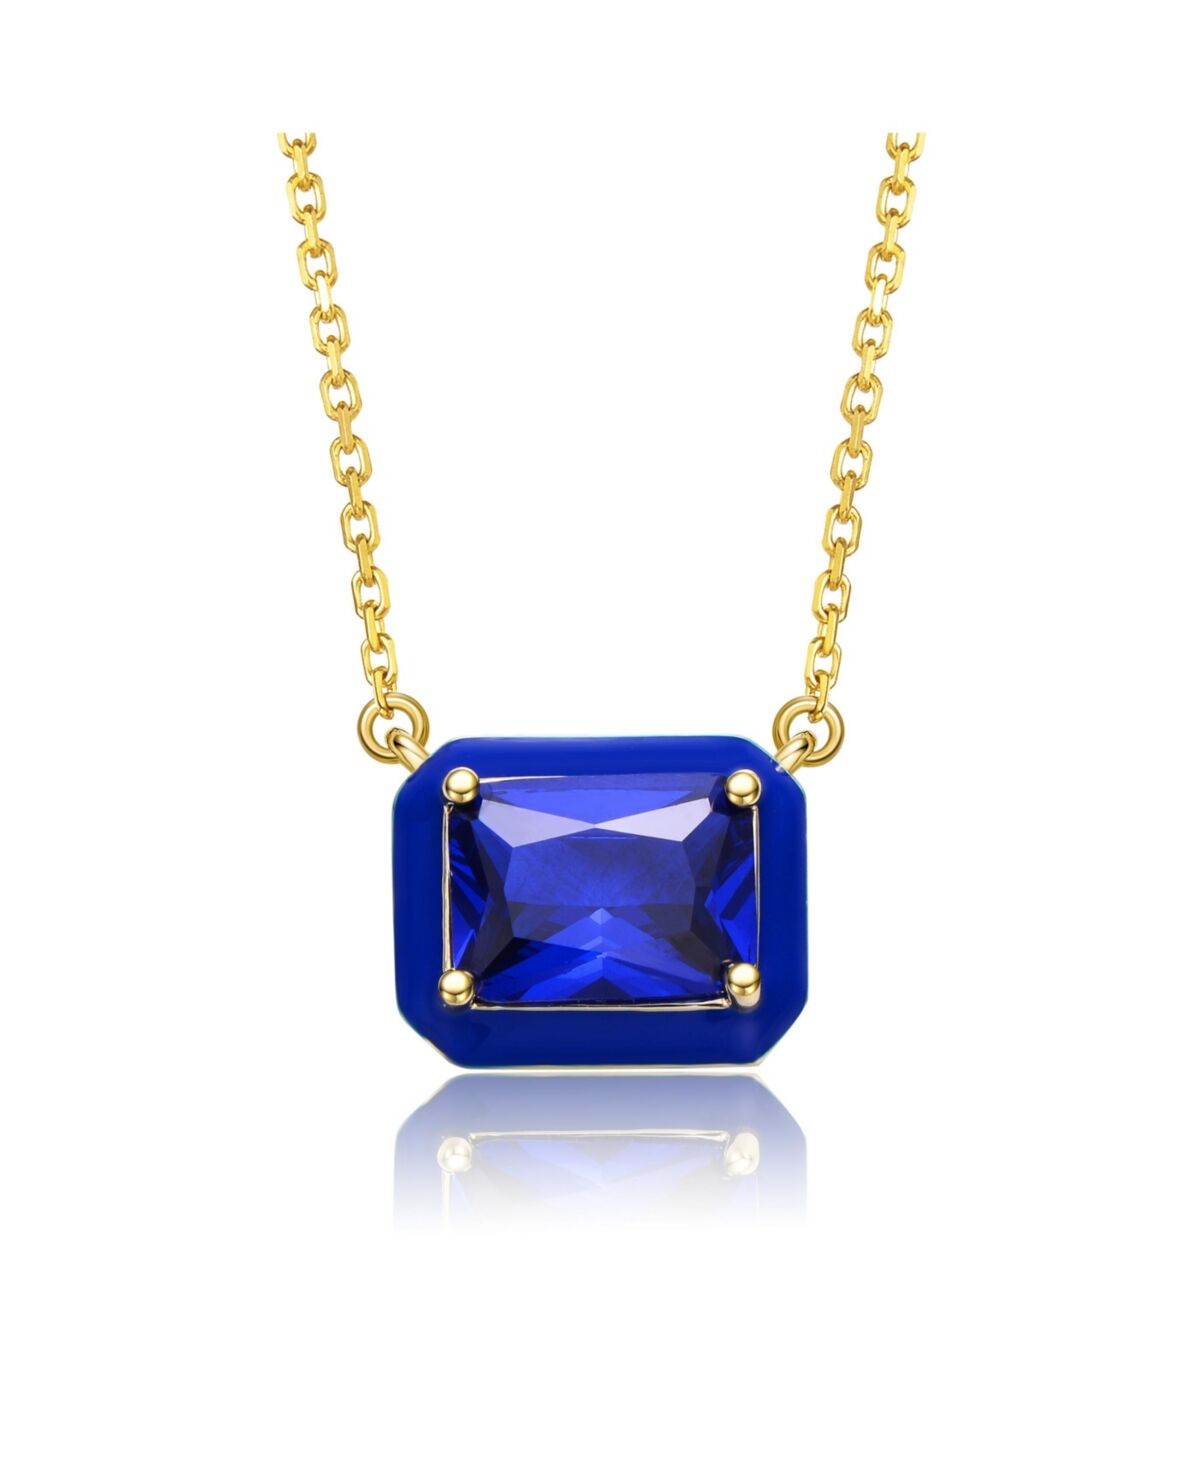 GiGiGirl Teens/Young Adults 14k Gold Plated with Radiant Cut Blue Sapphire Cubic Zirconia Solitaire Enamel Halo Petite Pendant Necklace - Gold